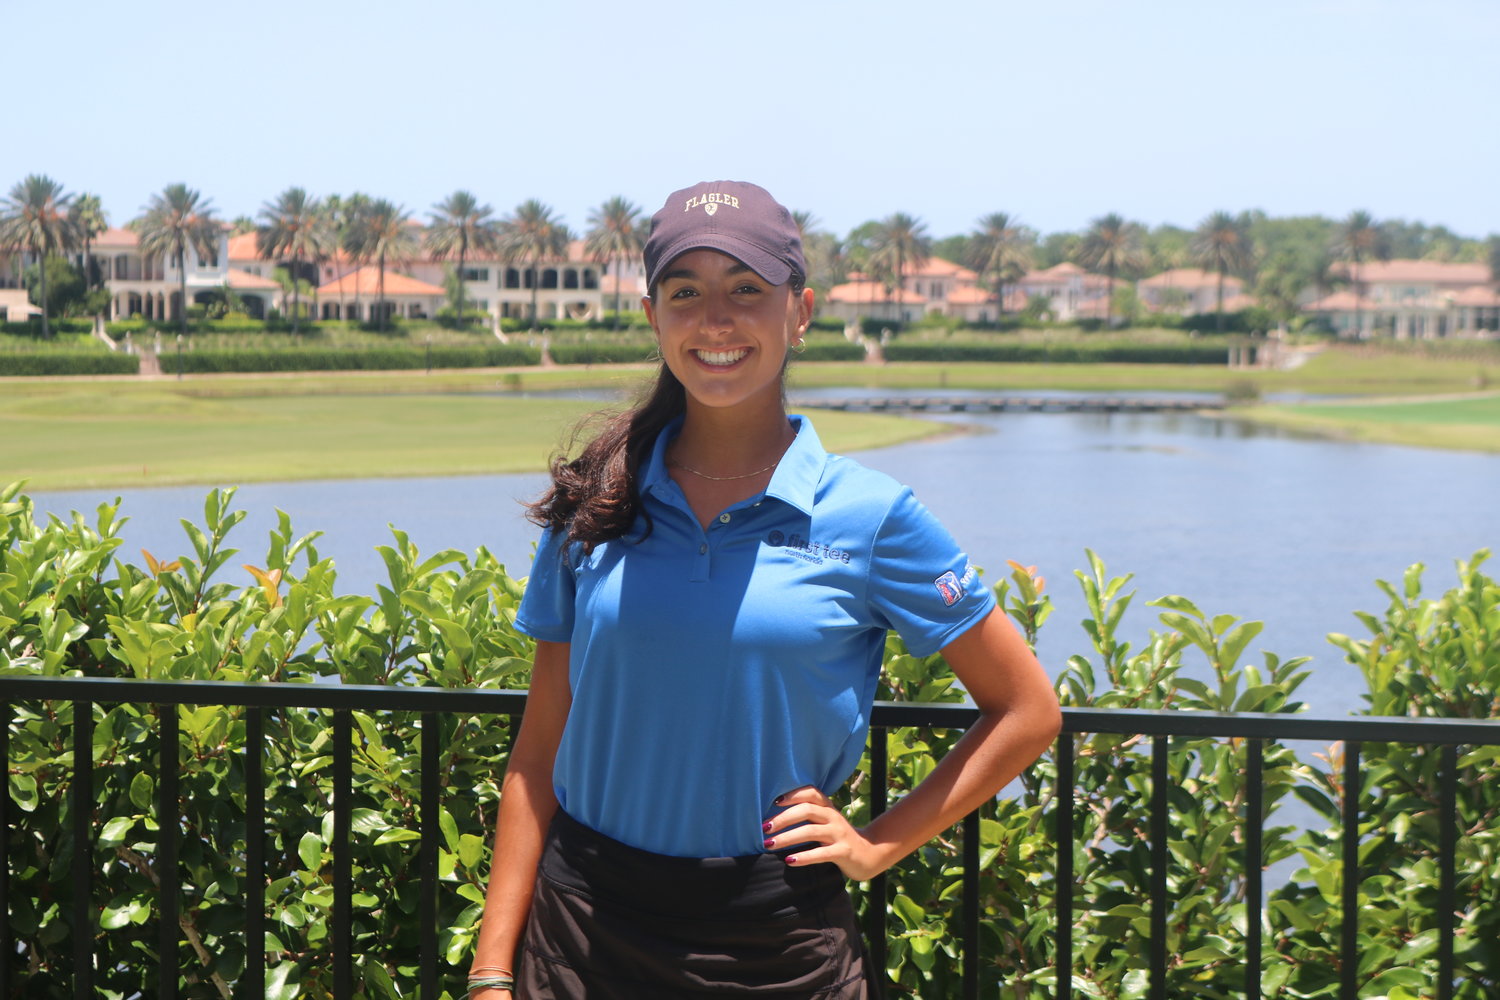 Grace Richards of Nocatee will compete in the PURE Insurance Championship at Pebble Beach Golf Links and Spyglass Hill Golf Course Sept. 20-26. Her home course is Palencia Golf Club.